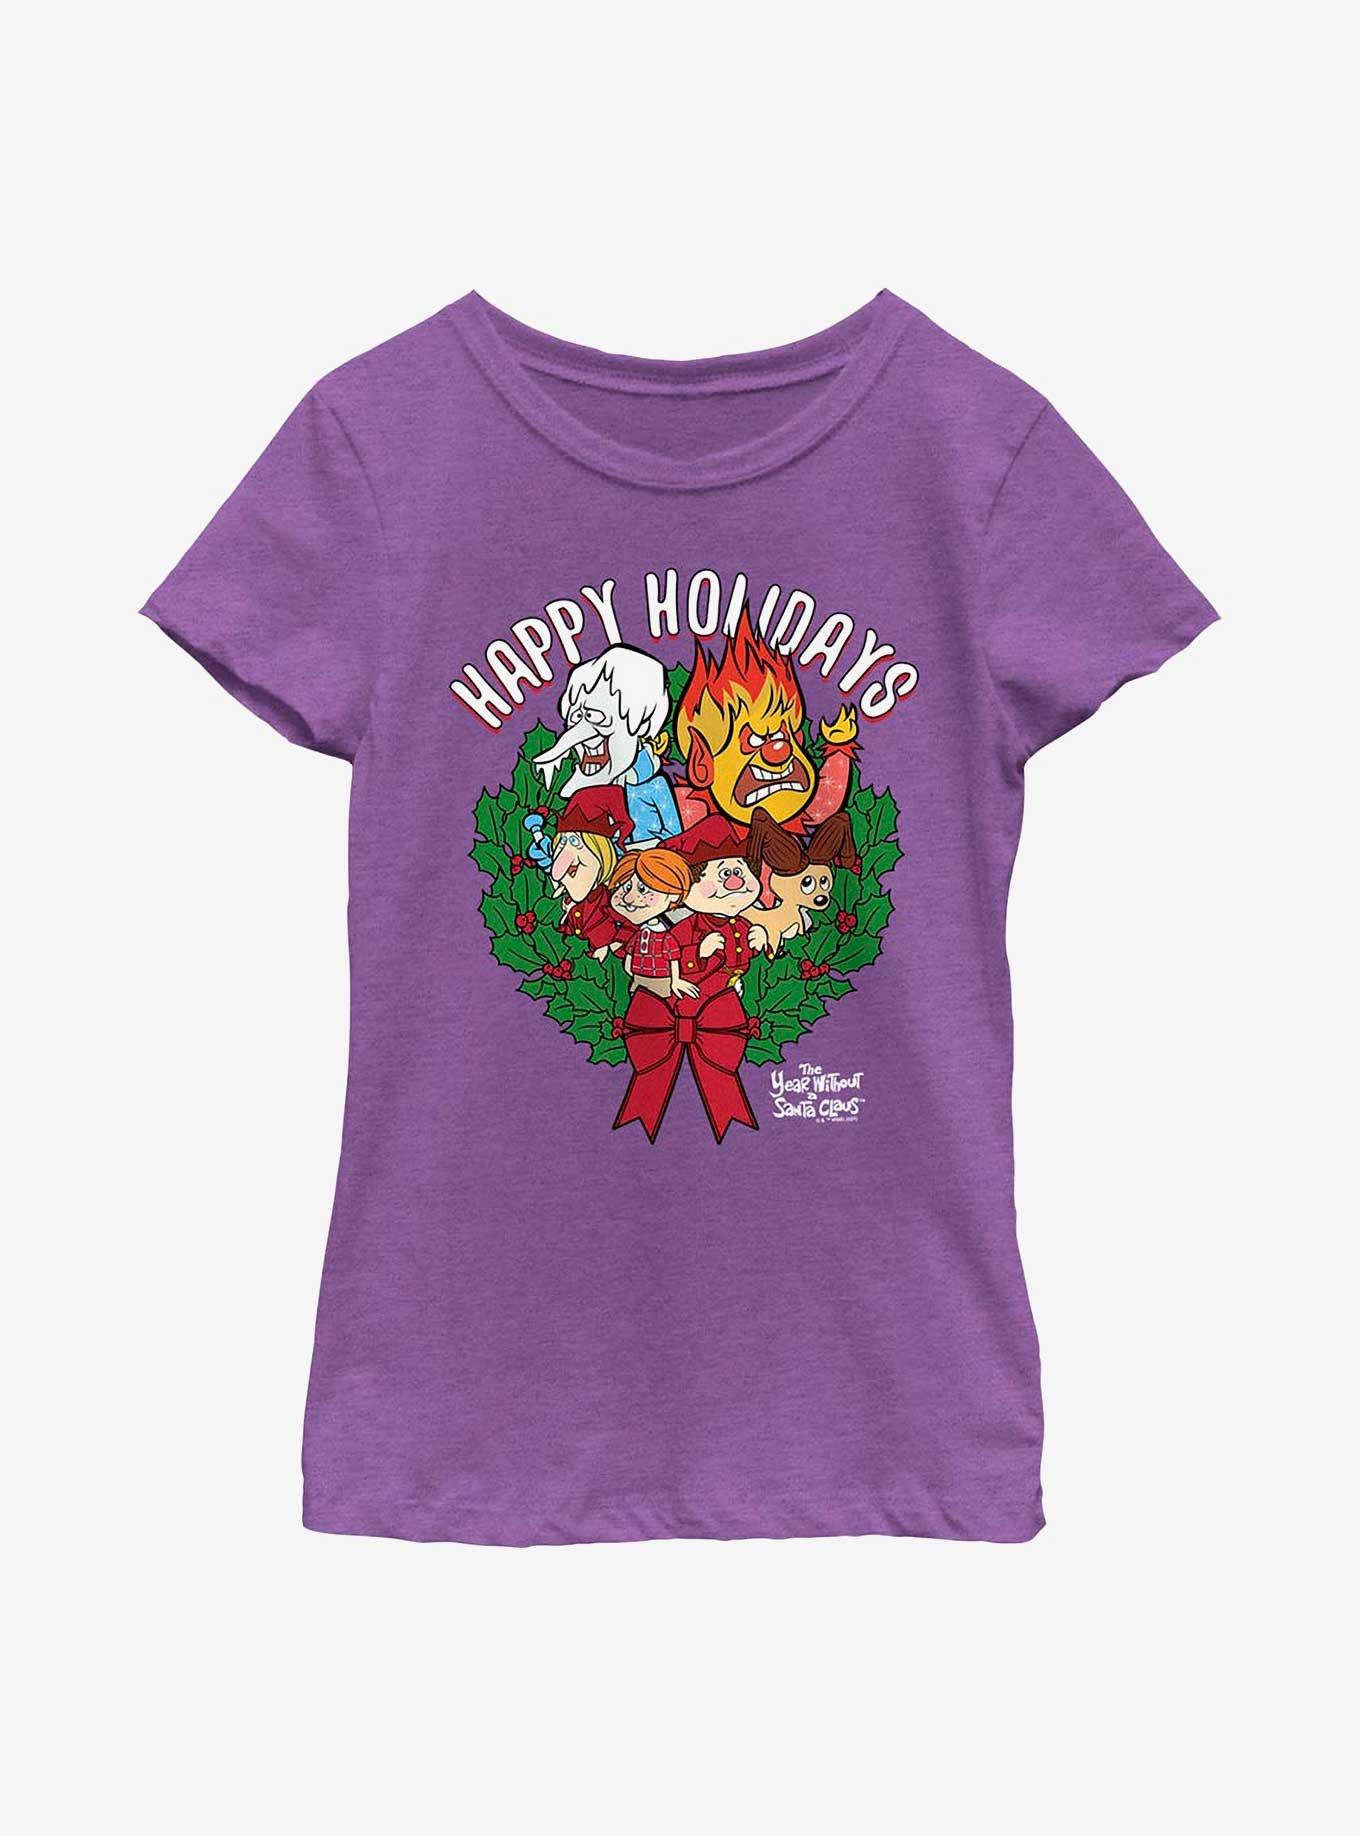 The Year Without Santa Claus Wreath Group Youth Girls T-Shirt, PURPLE BERRY, hi-res